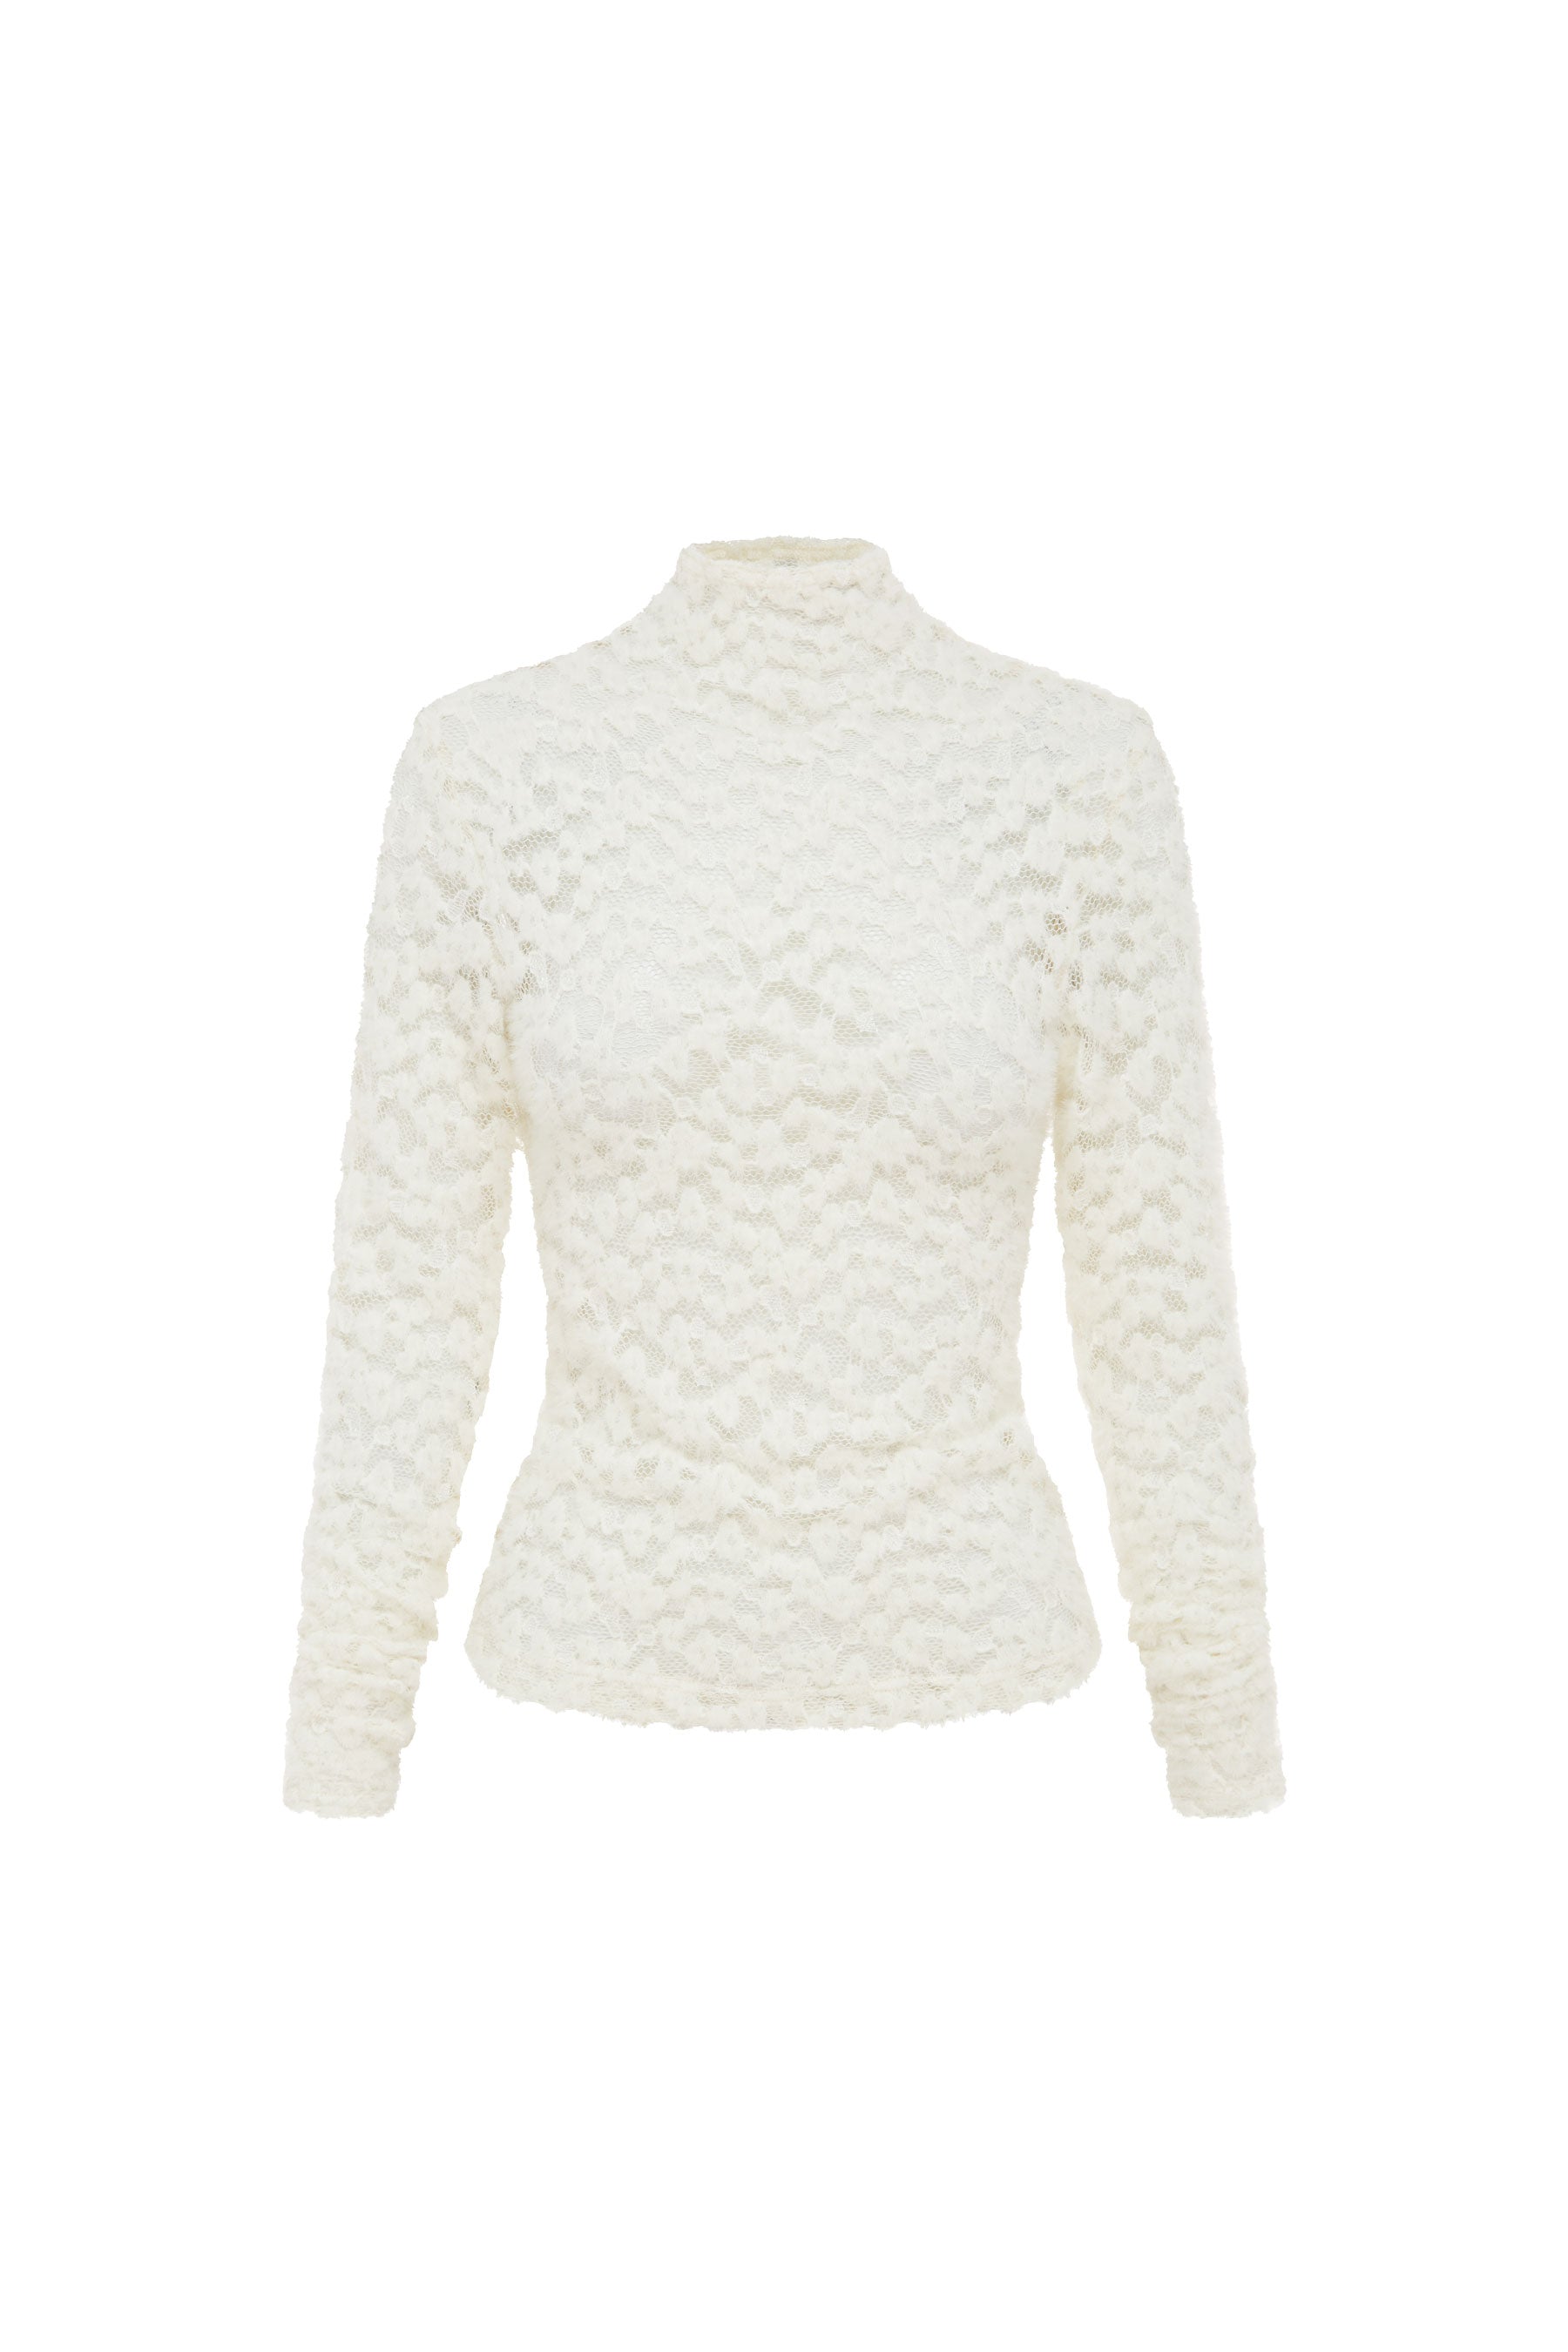 Galo Fuzzy Lace Top // Creme